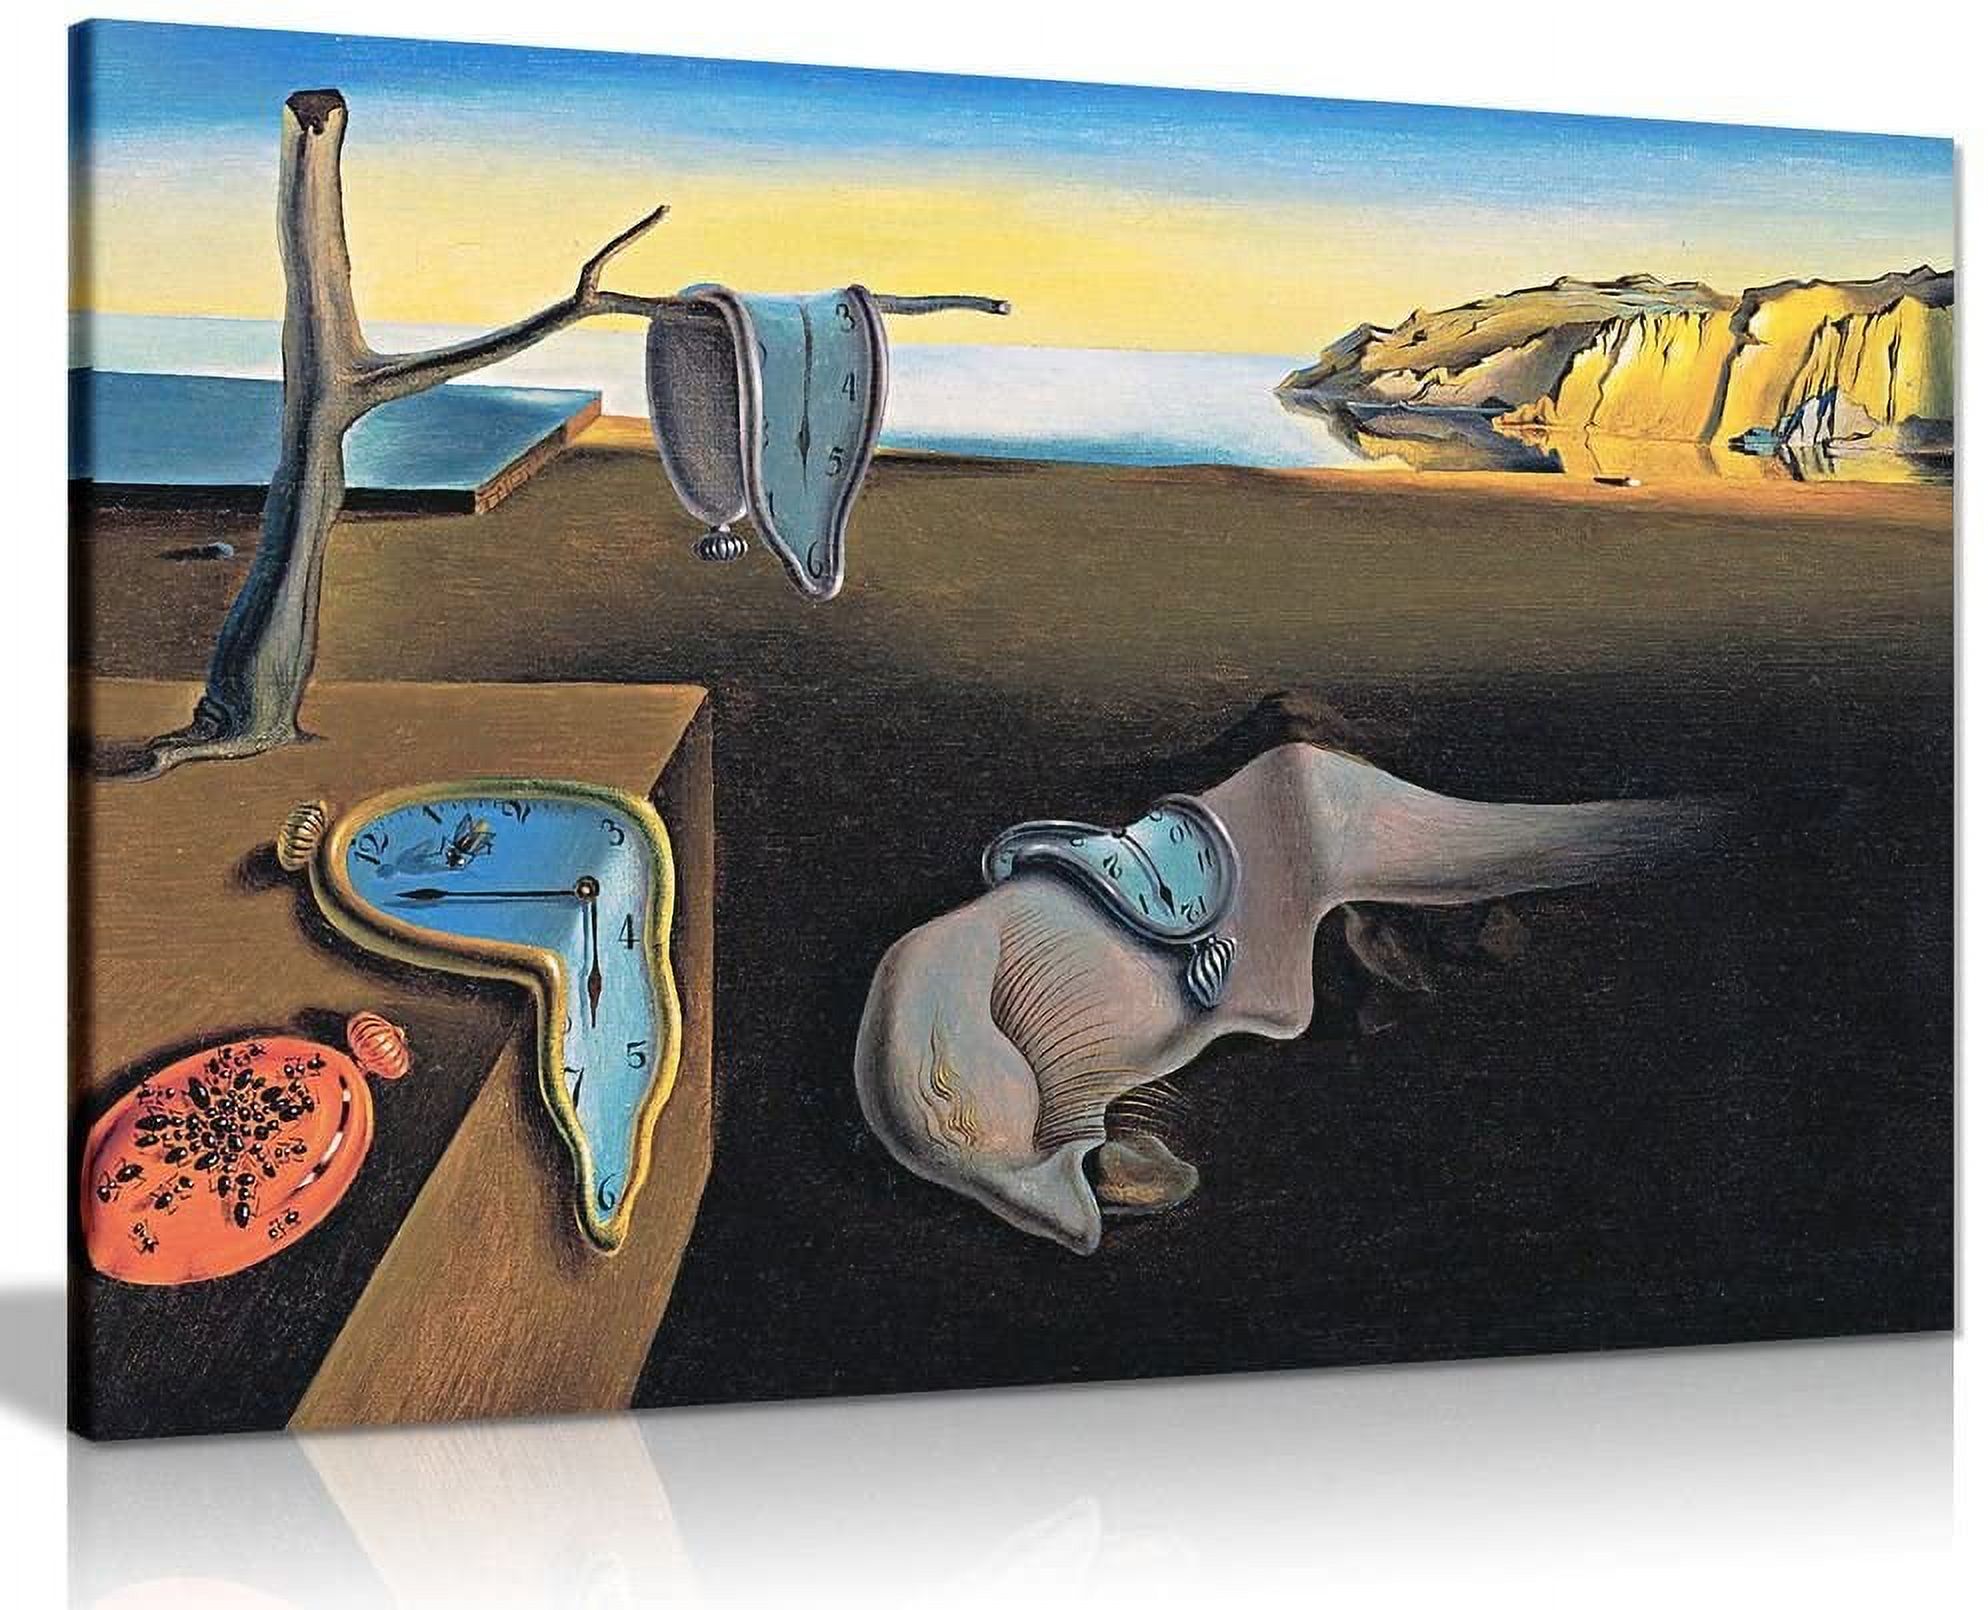 Salvador Dali Wall Art Dalí Persistence of Time Framed Painting Canvas Art For Bedroom Livingroom Decoration Ready to Hang - image 1 of 7